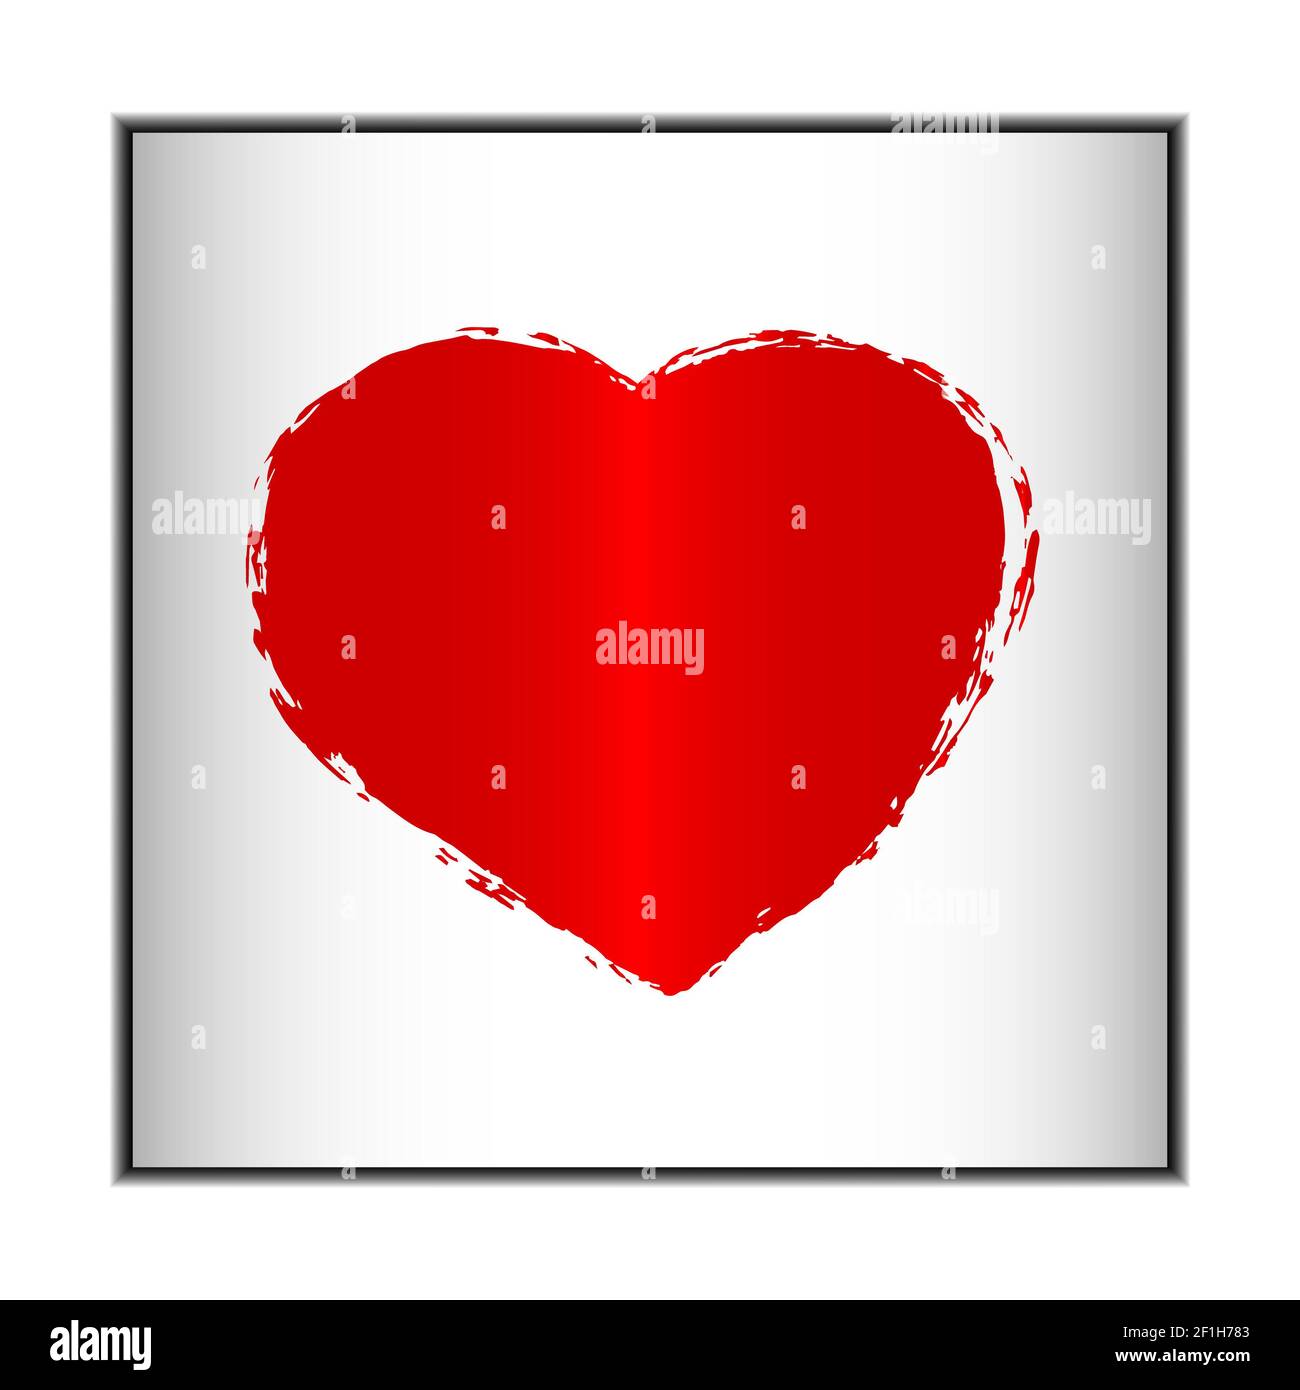 Red Watercolor Heart Stock Photo